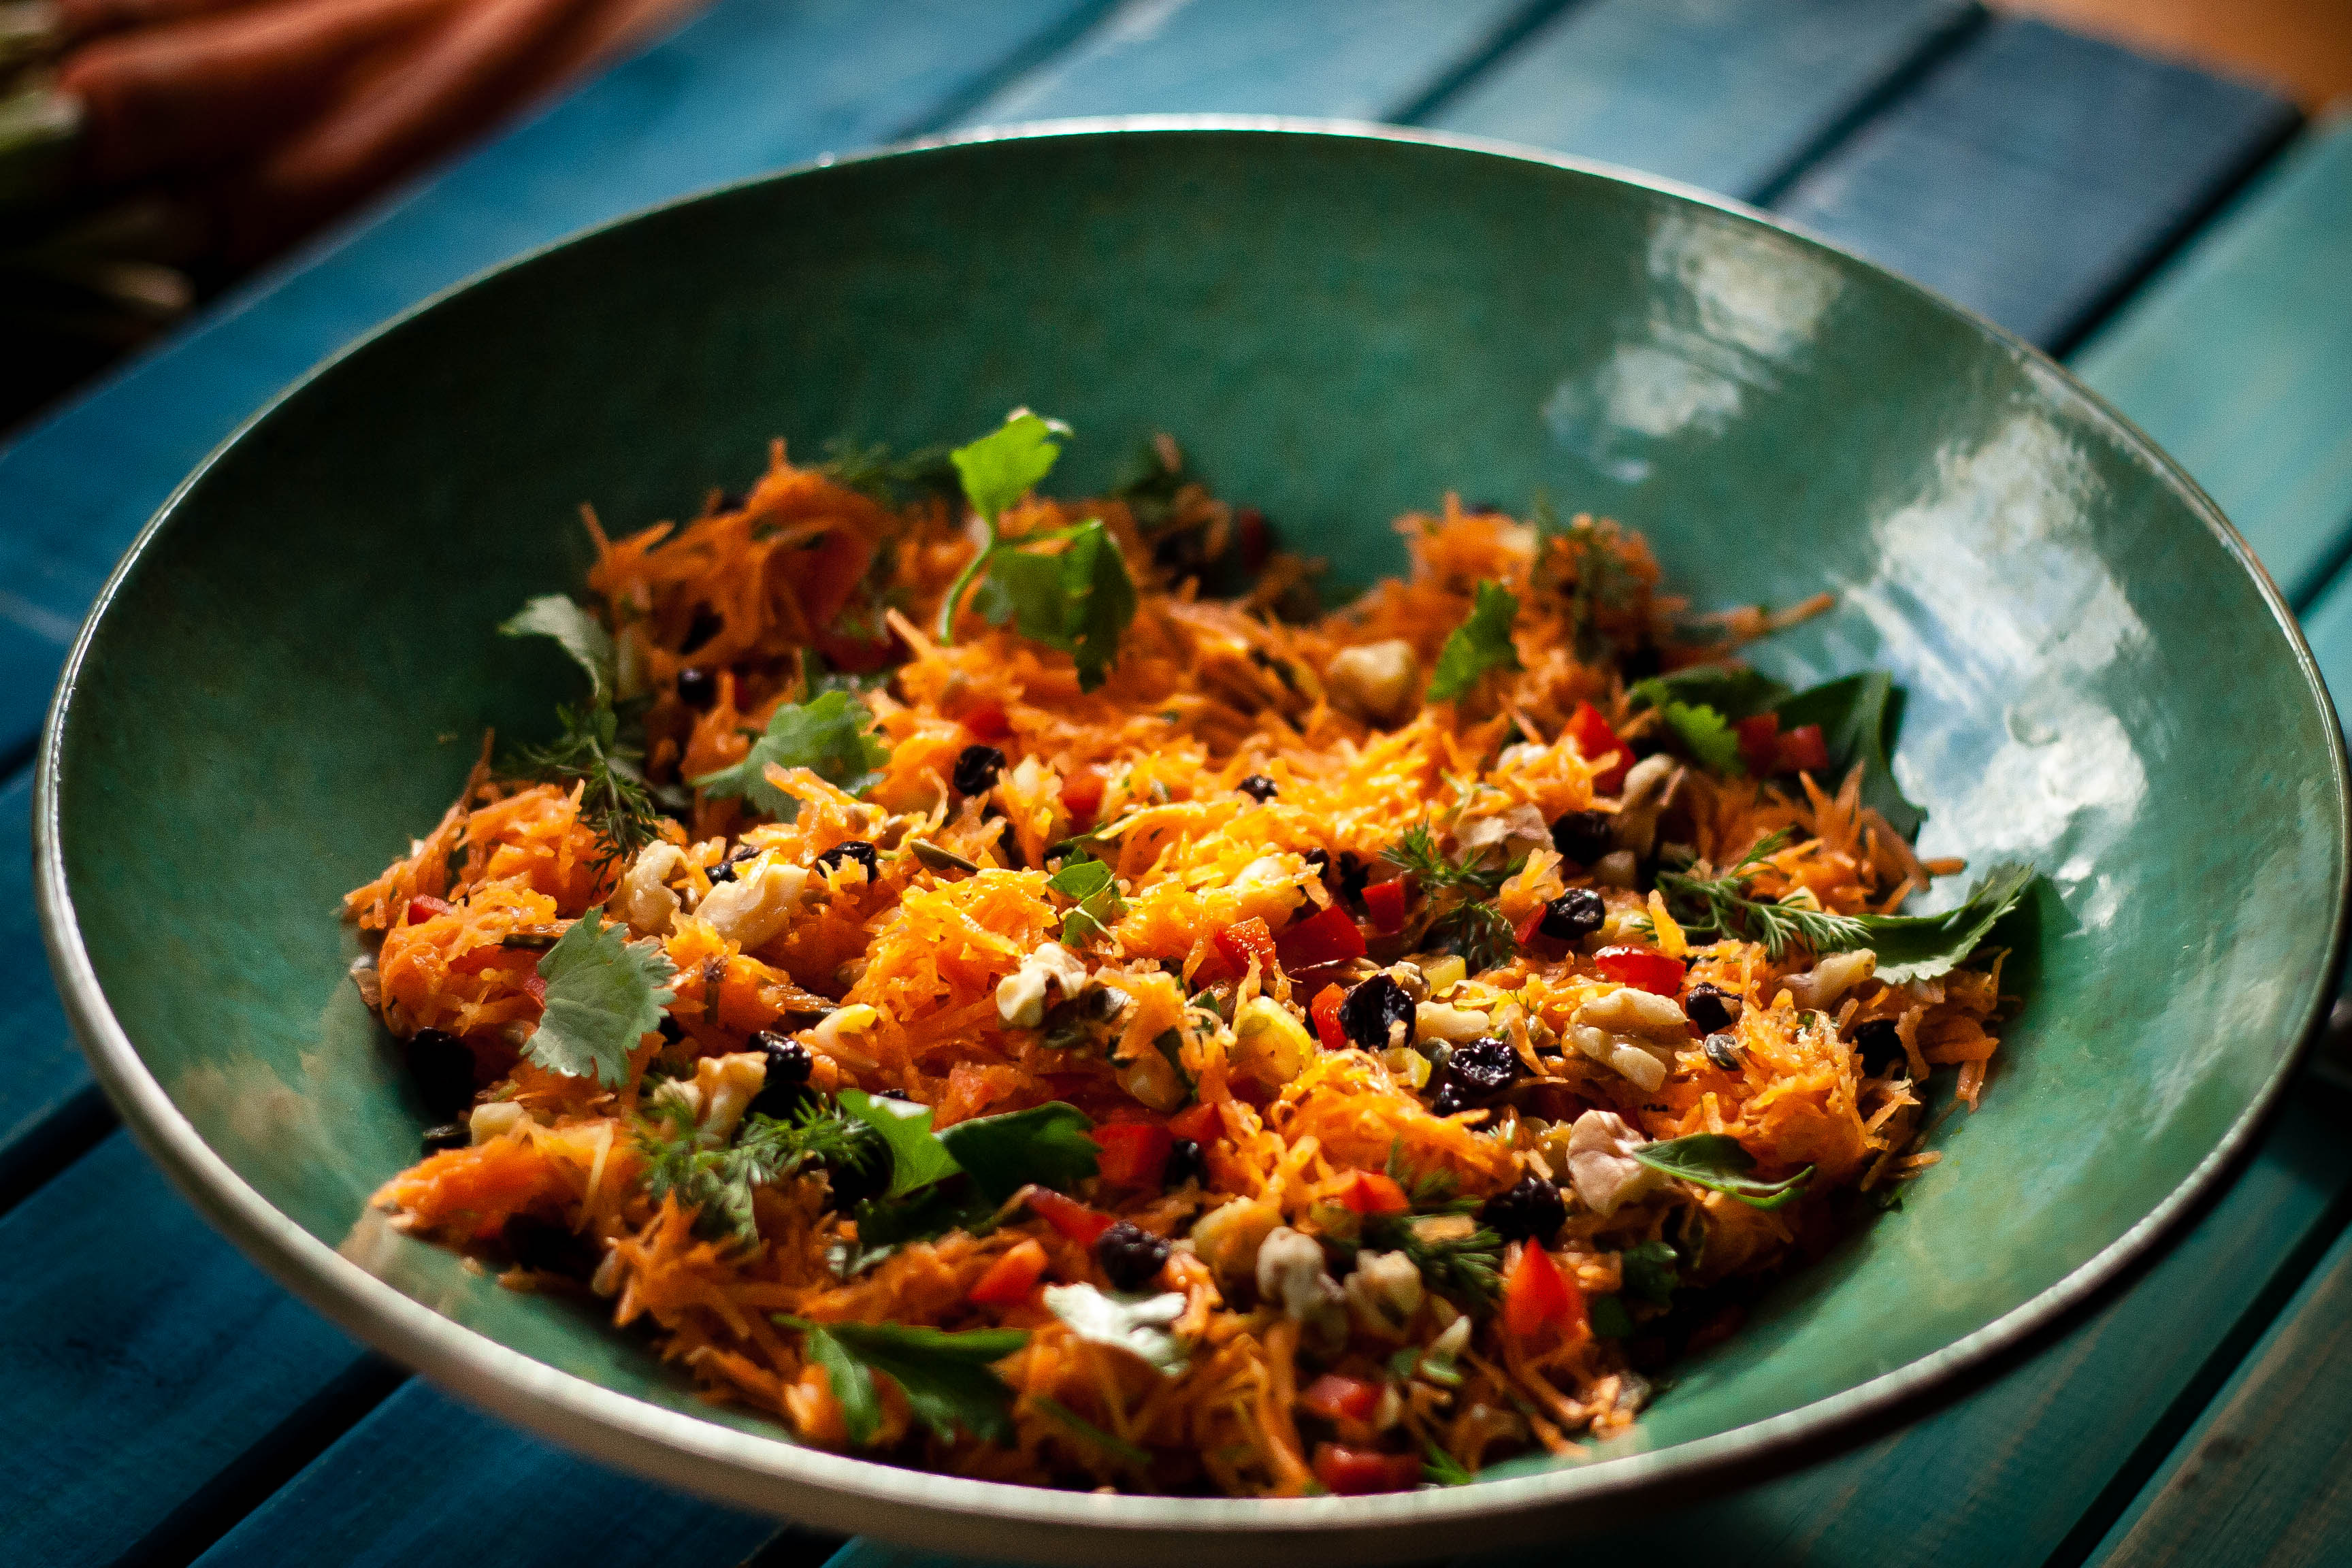 Tangy Carrot Salad